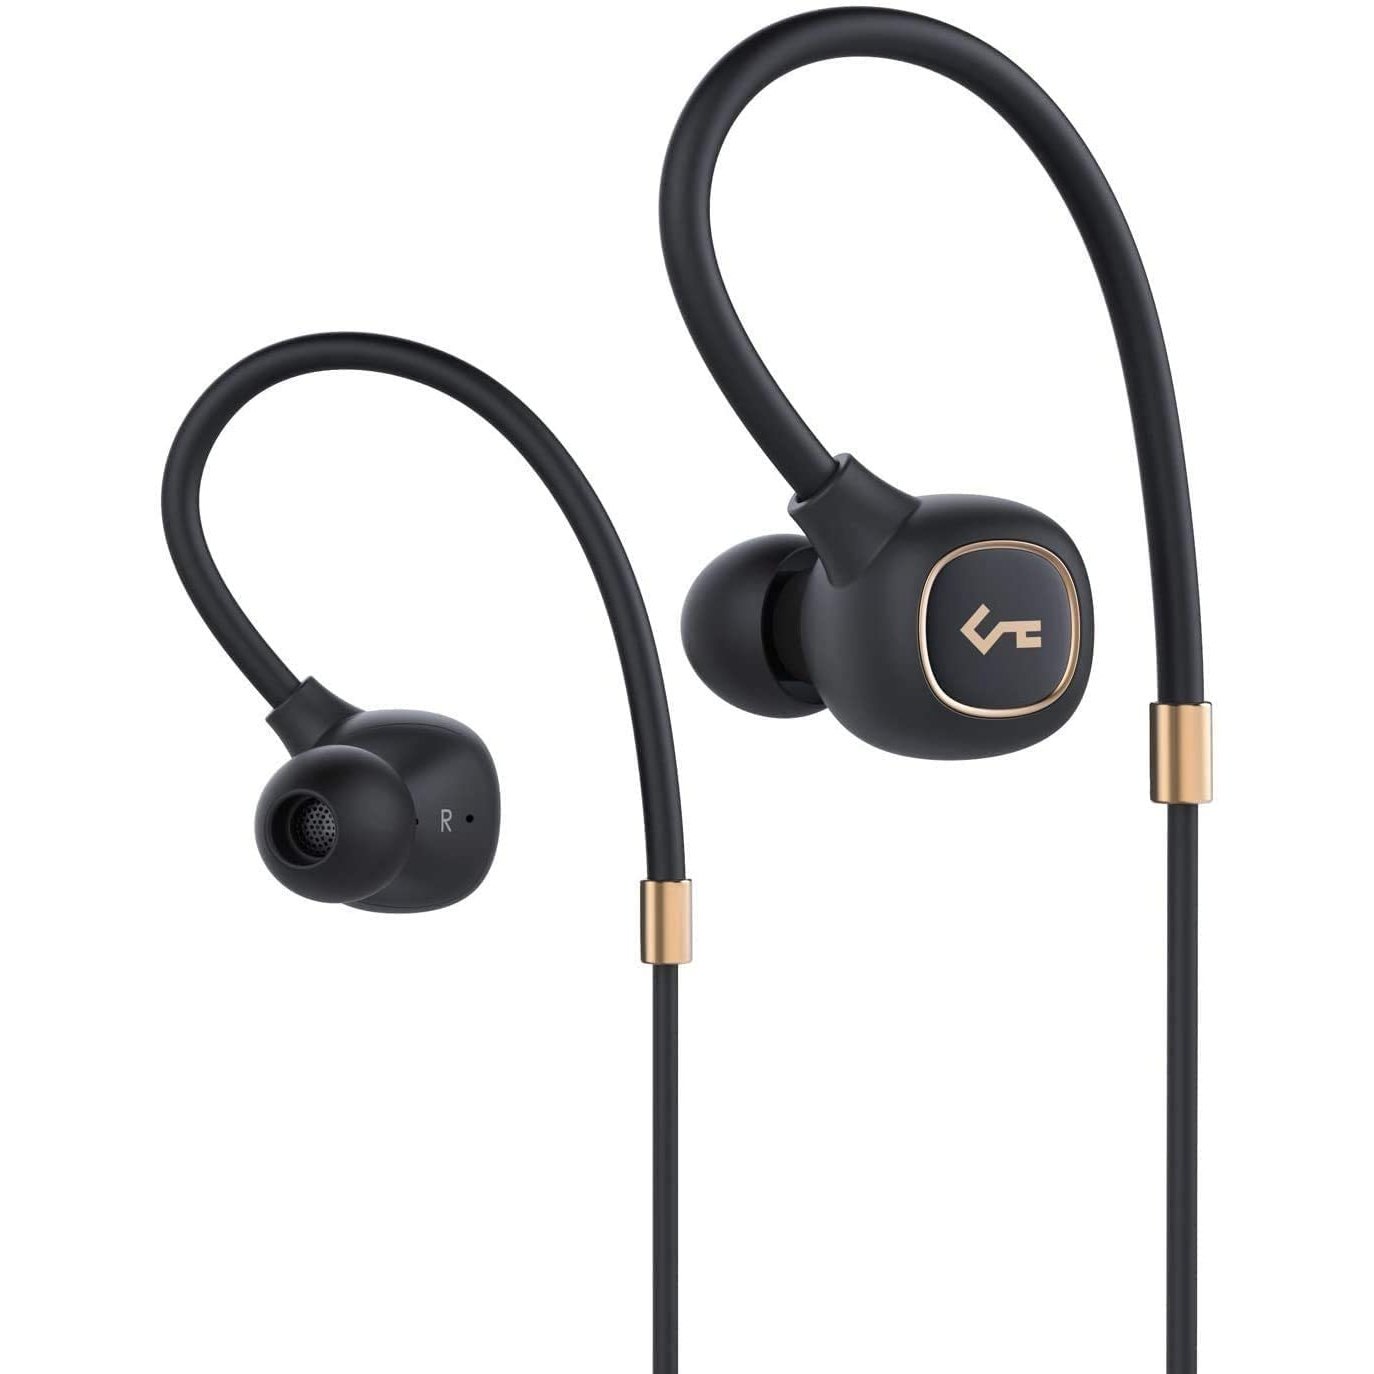 Aukey Magnetic Earbuds EP-B80